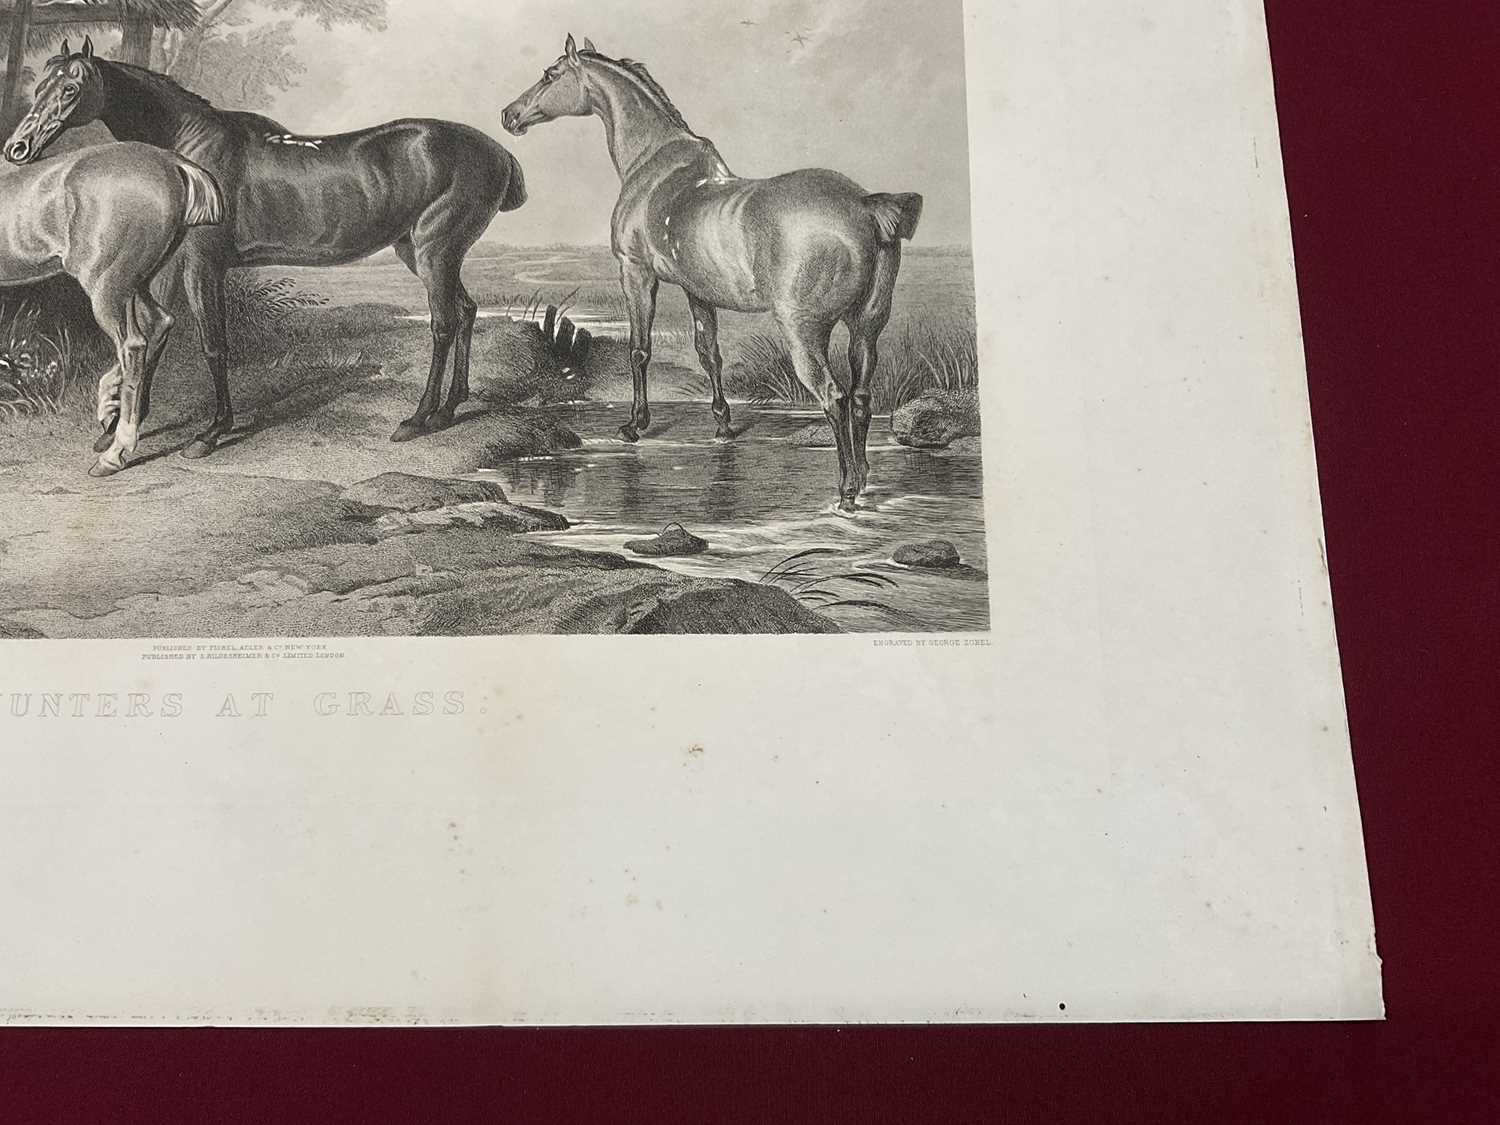 19th century engraving by George Zobel after Sir Edwin Landseer - Hunters at Grass, published by Fis - Image 3 of 6